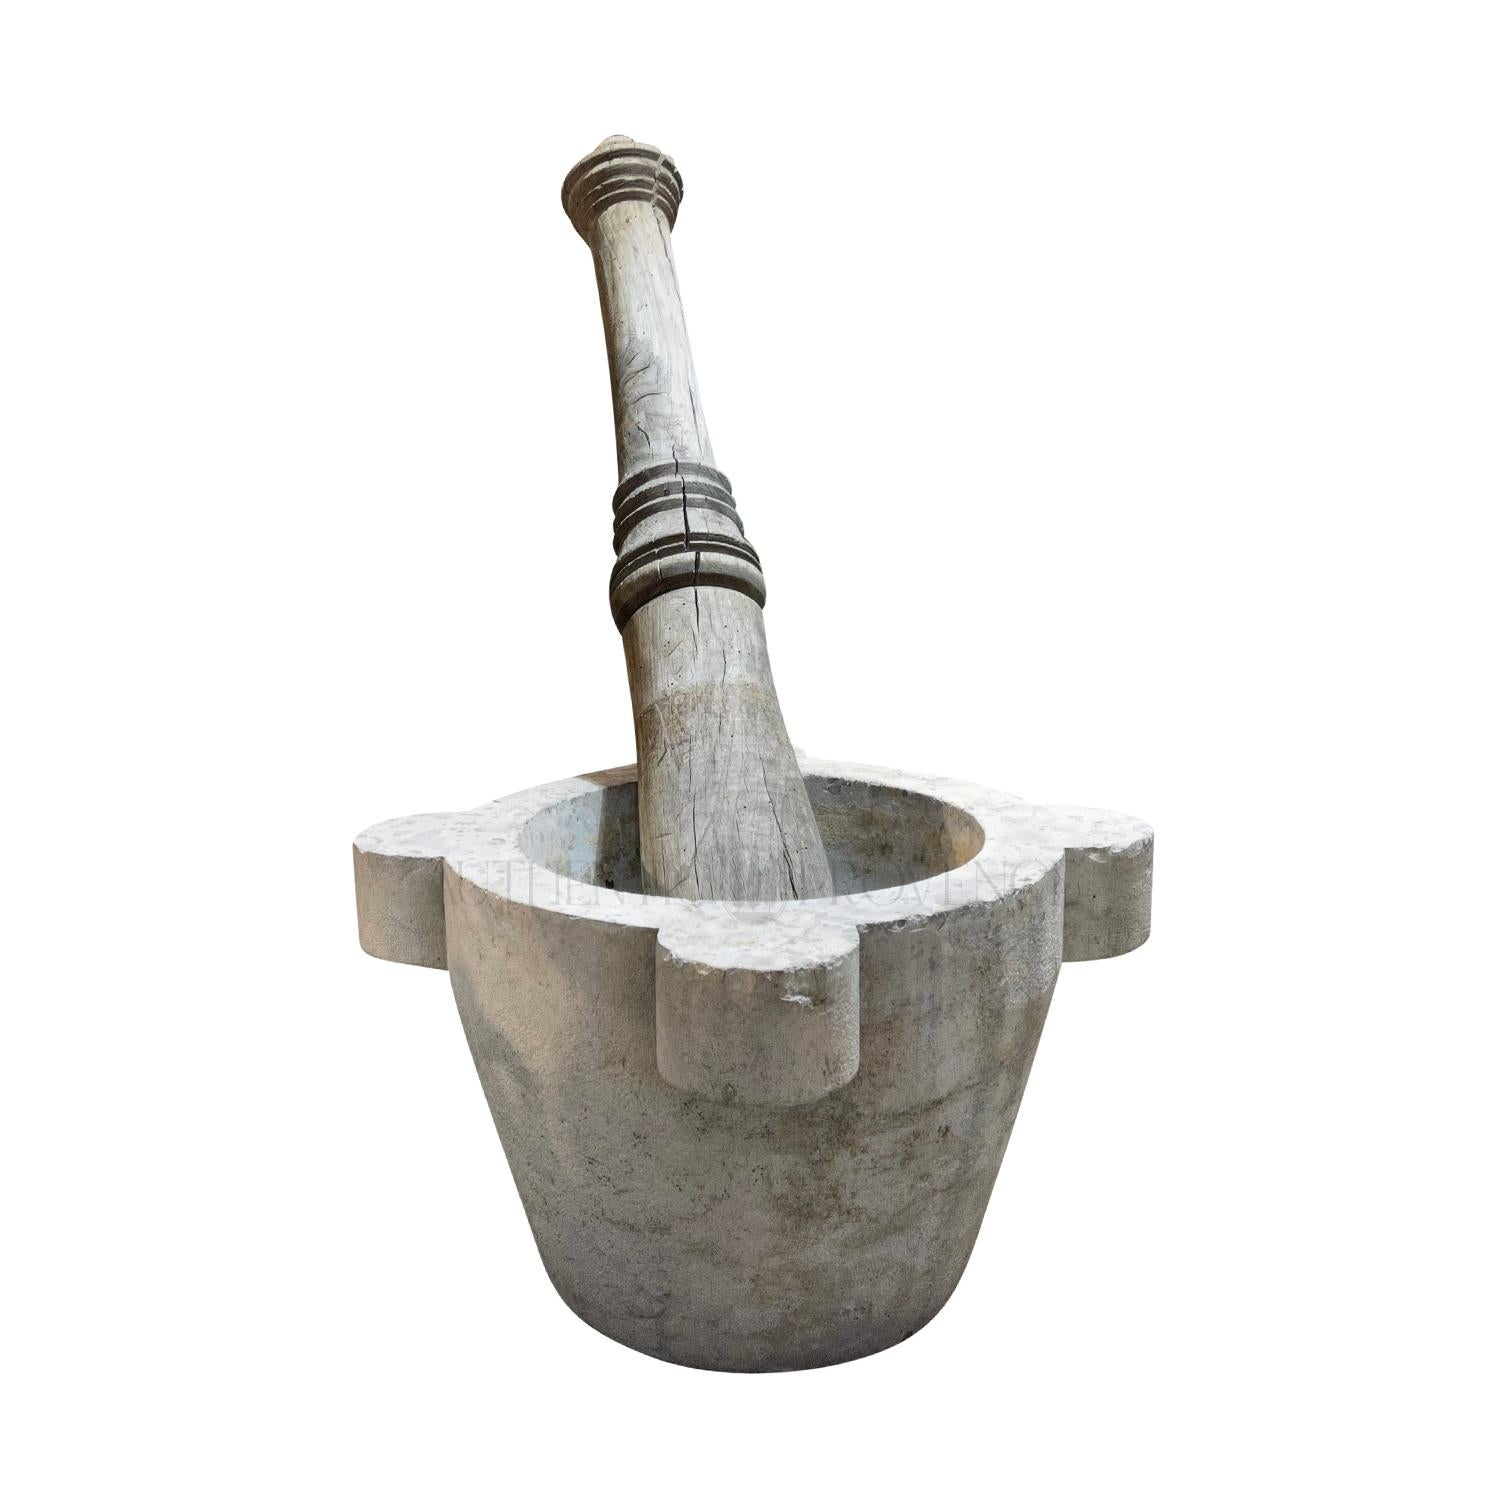 Early 19th century, a set of an oversized mortar made of hand crafted white marble with a wooden Oakwood pestle, in good condition. This fun set was on display in a pharmacy in Milan. These simple tools have been used from the Stone age to the